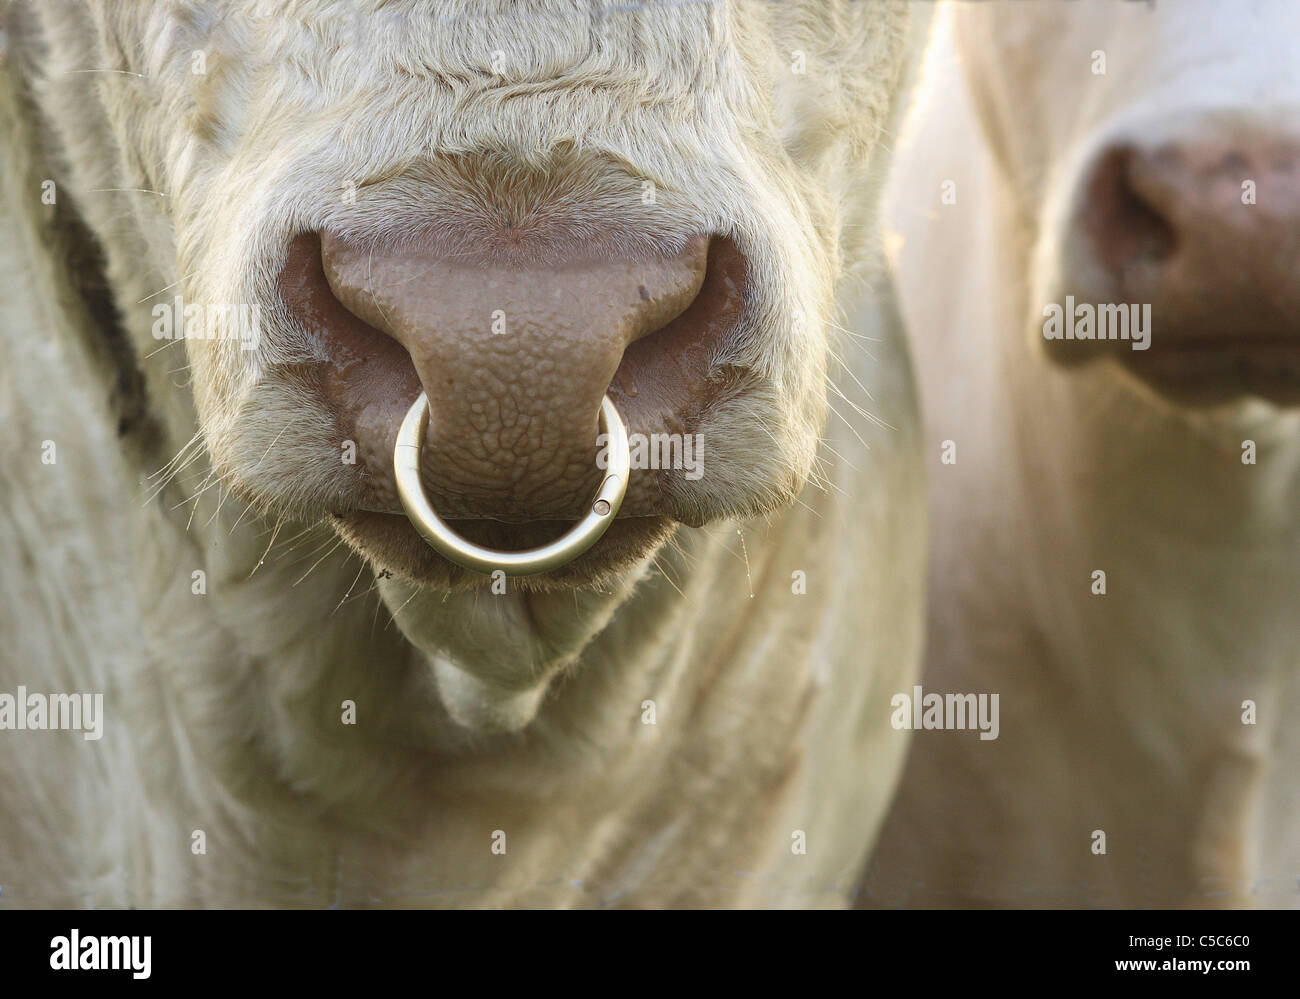 Detail shot of a white bull with nose ring Stock Photo - Alamy